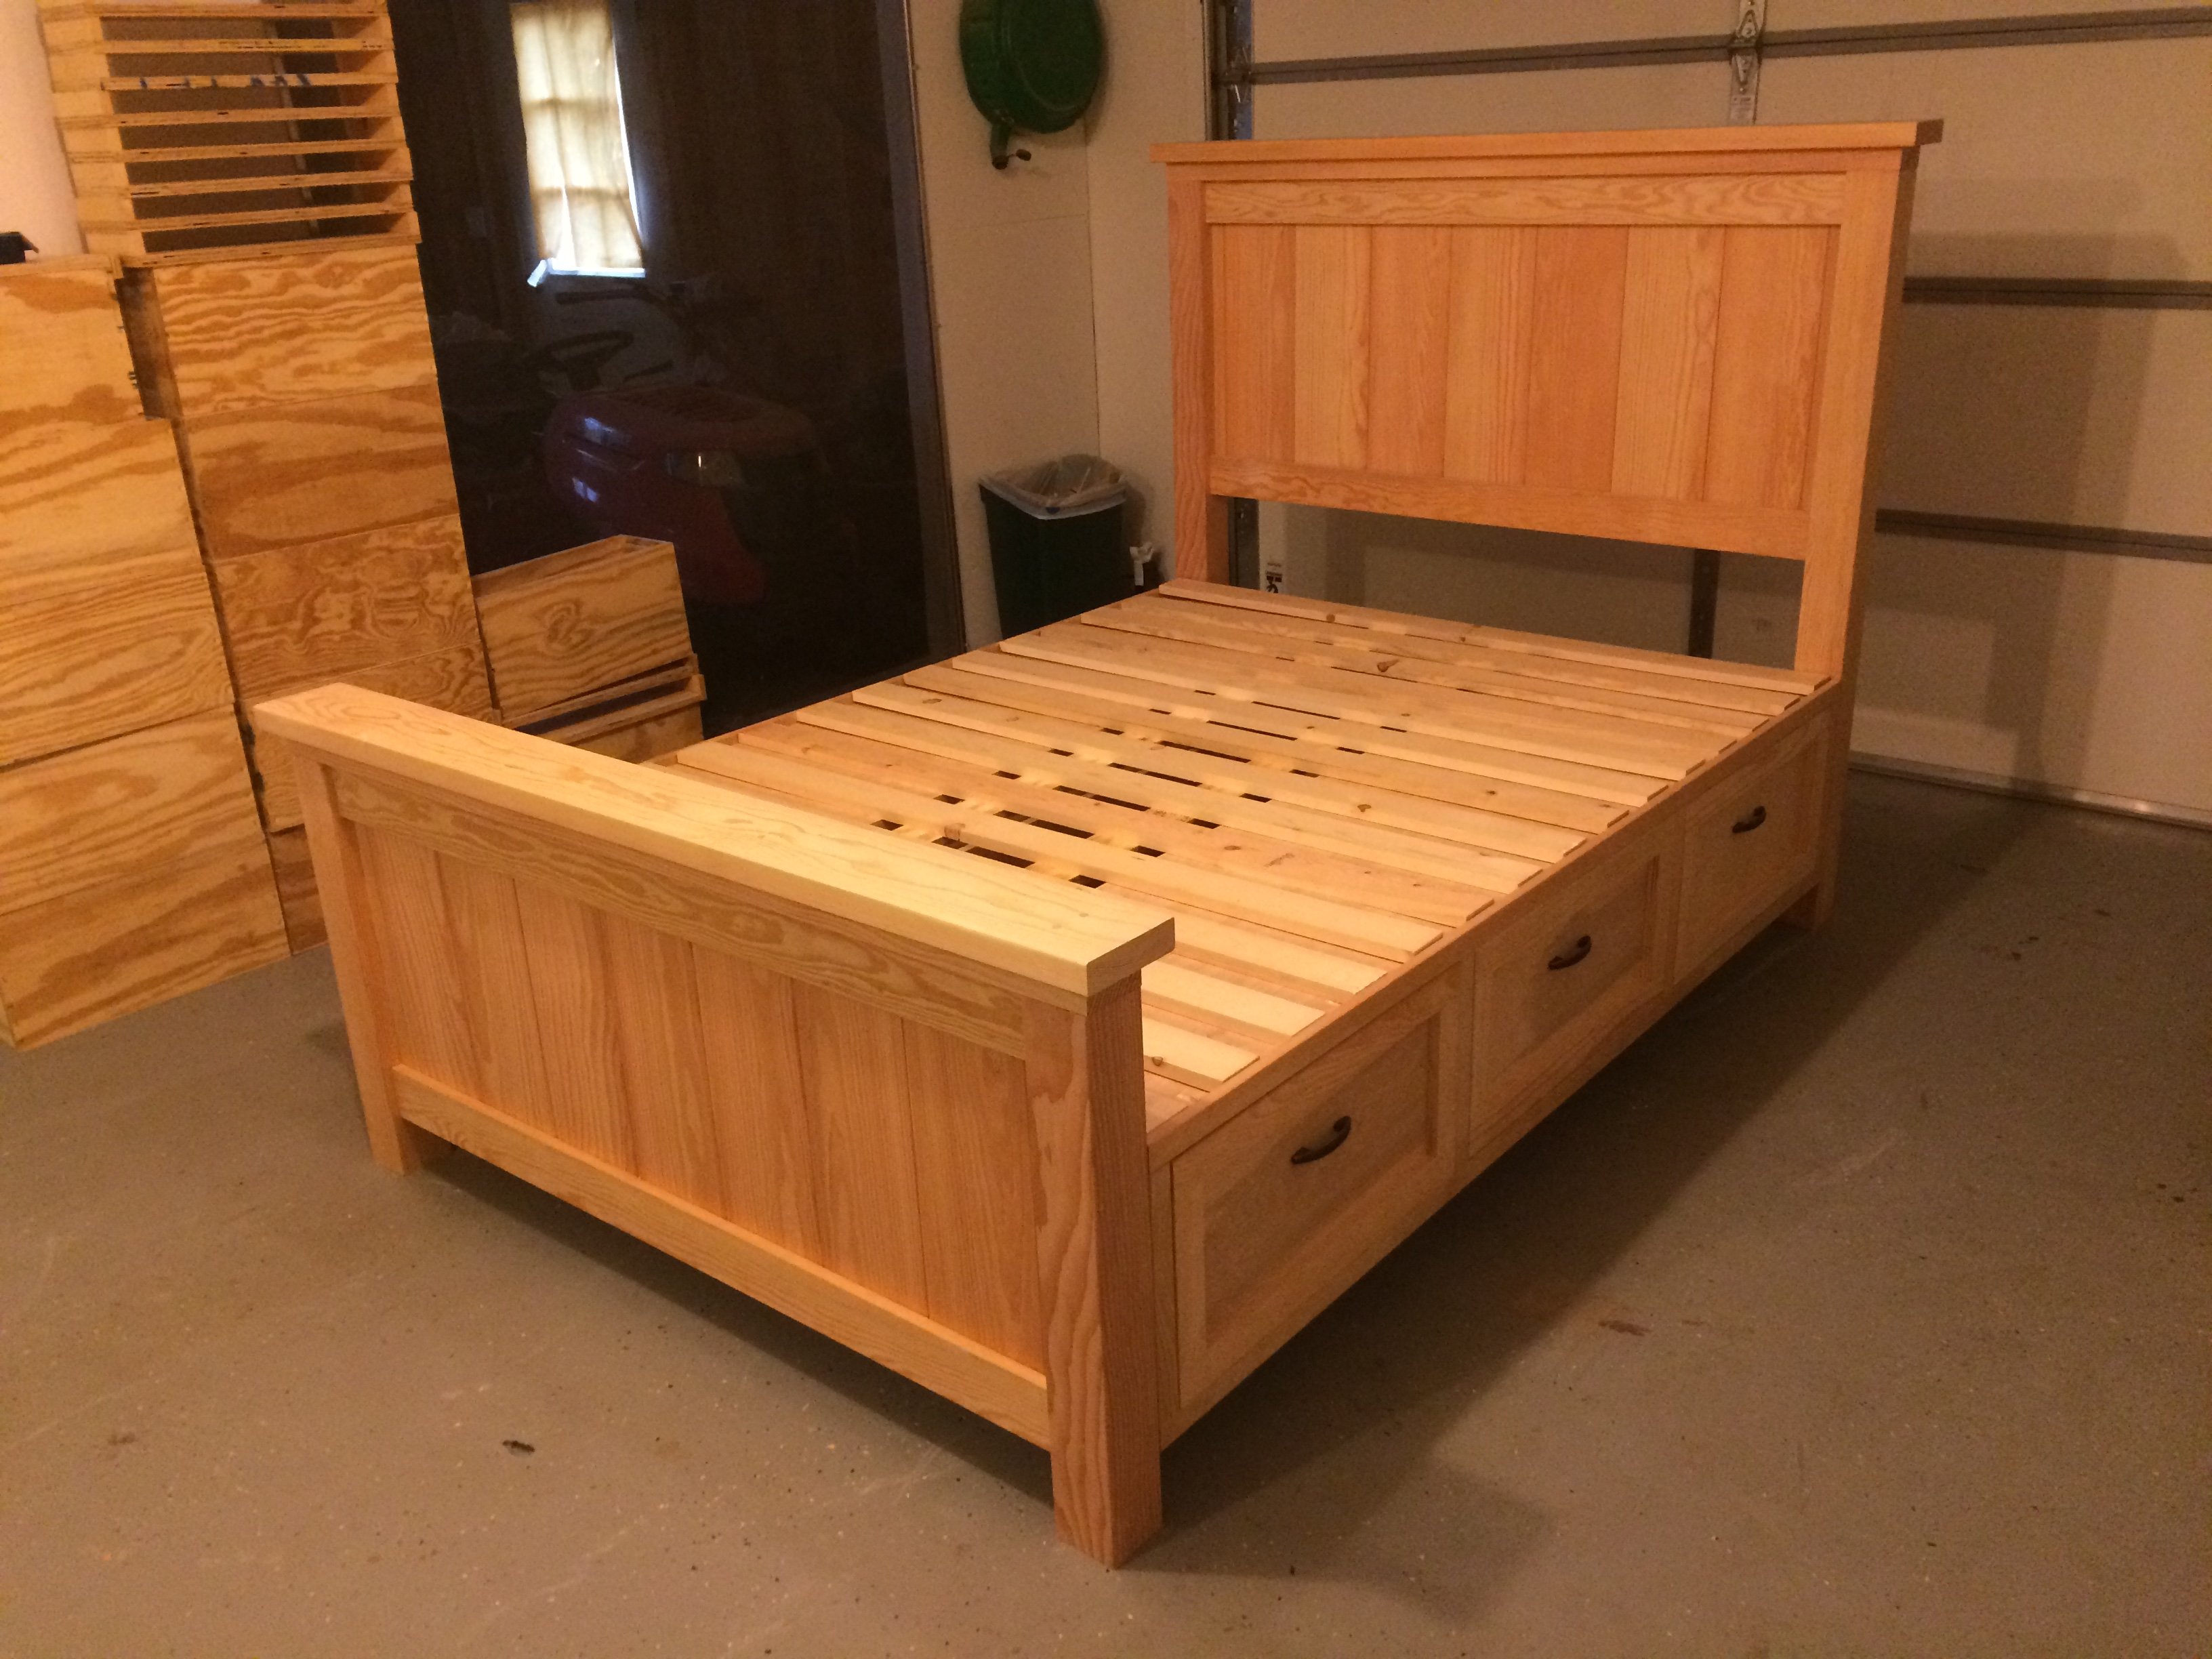 Farmhouse Storage Bed With Drawers, How To Build A King Platform Bed With Storage Drawers Plans